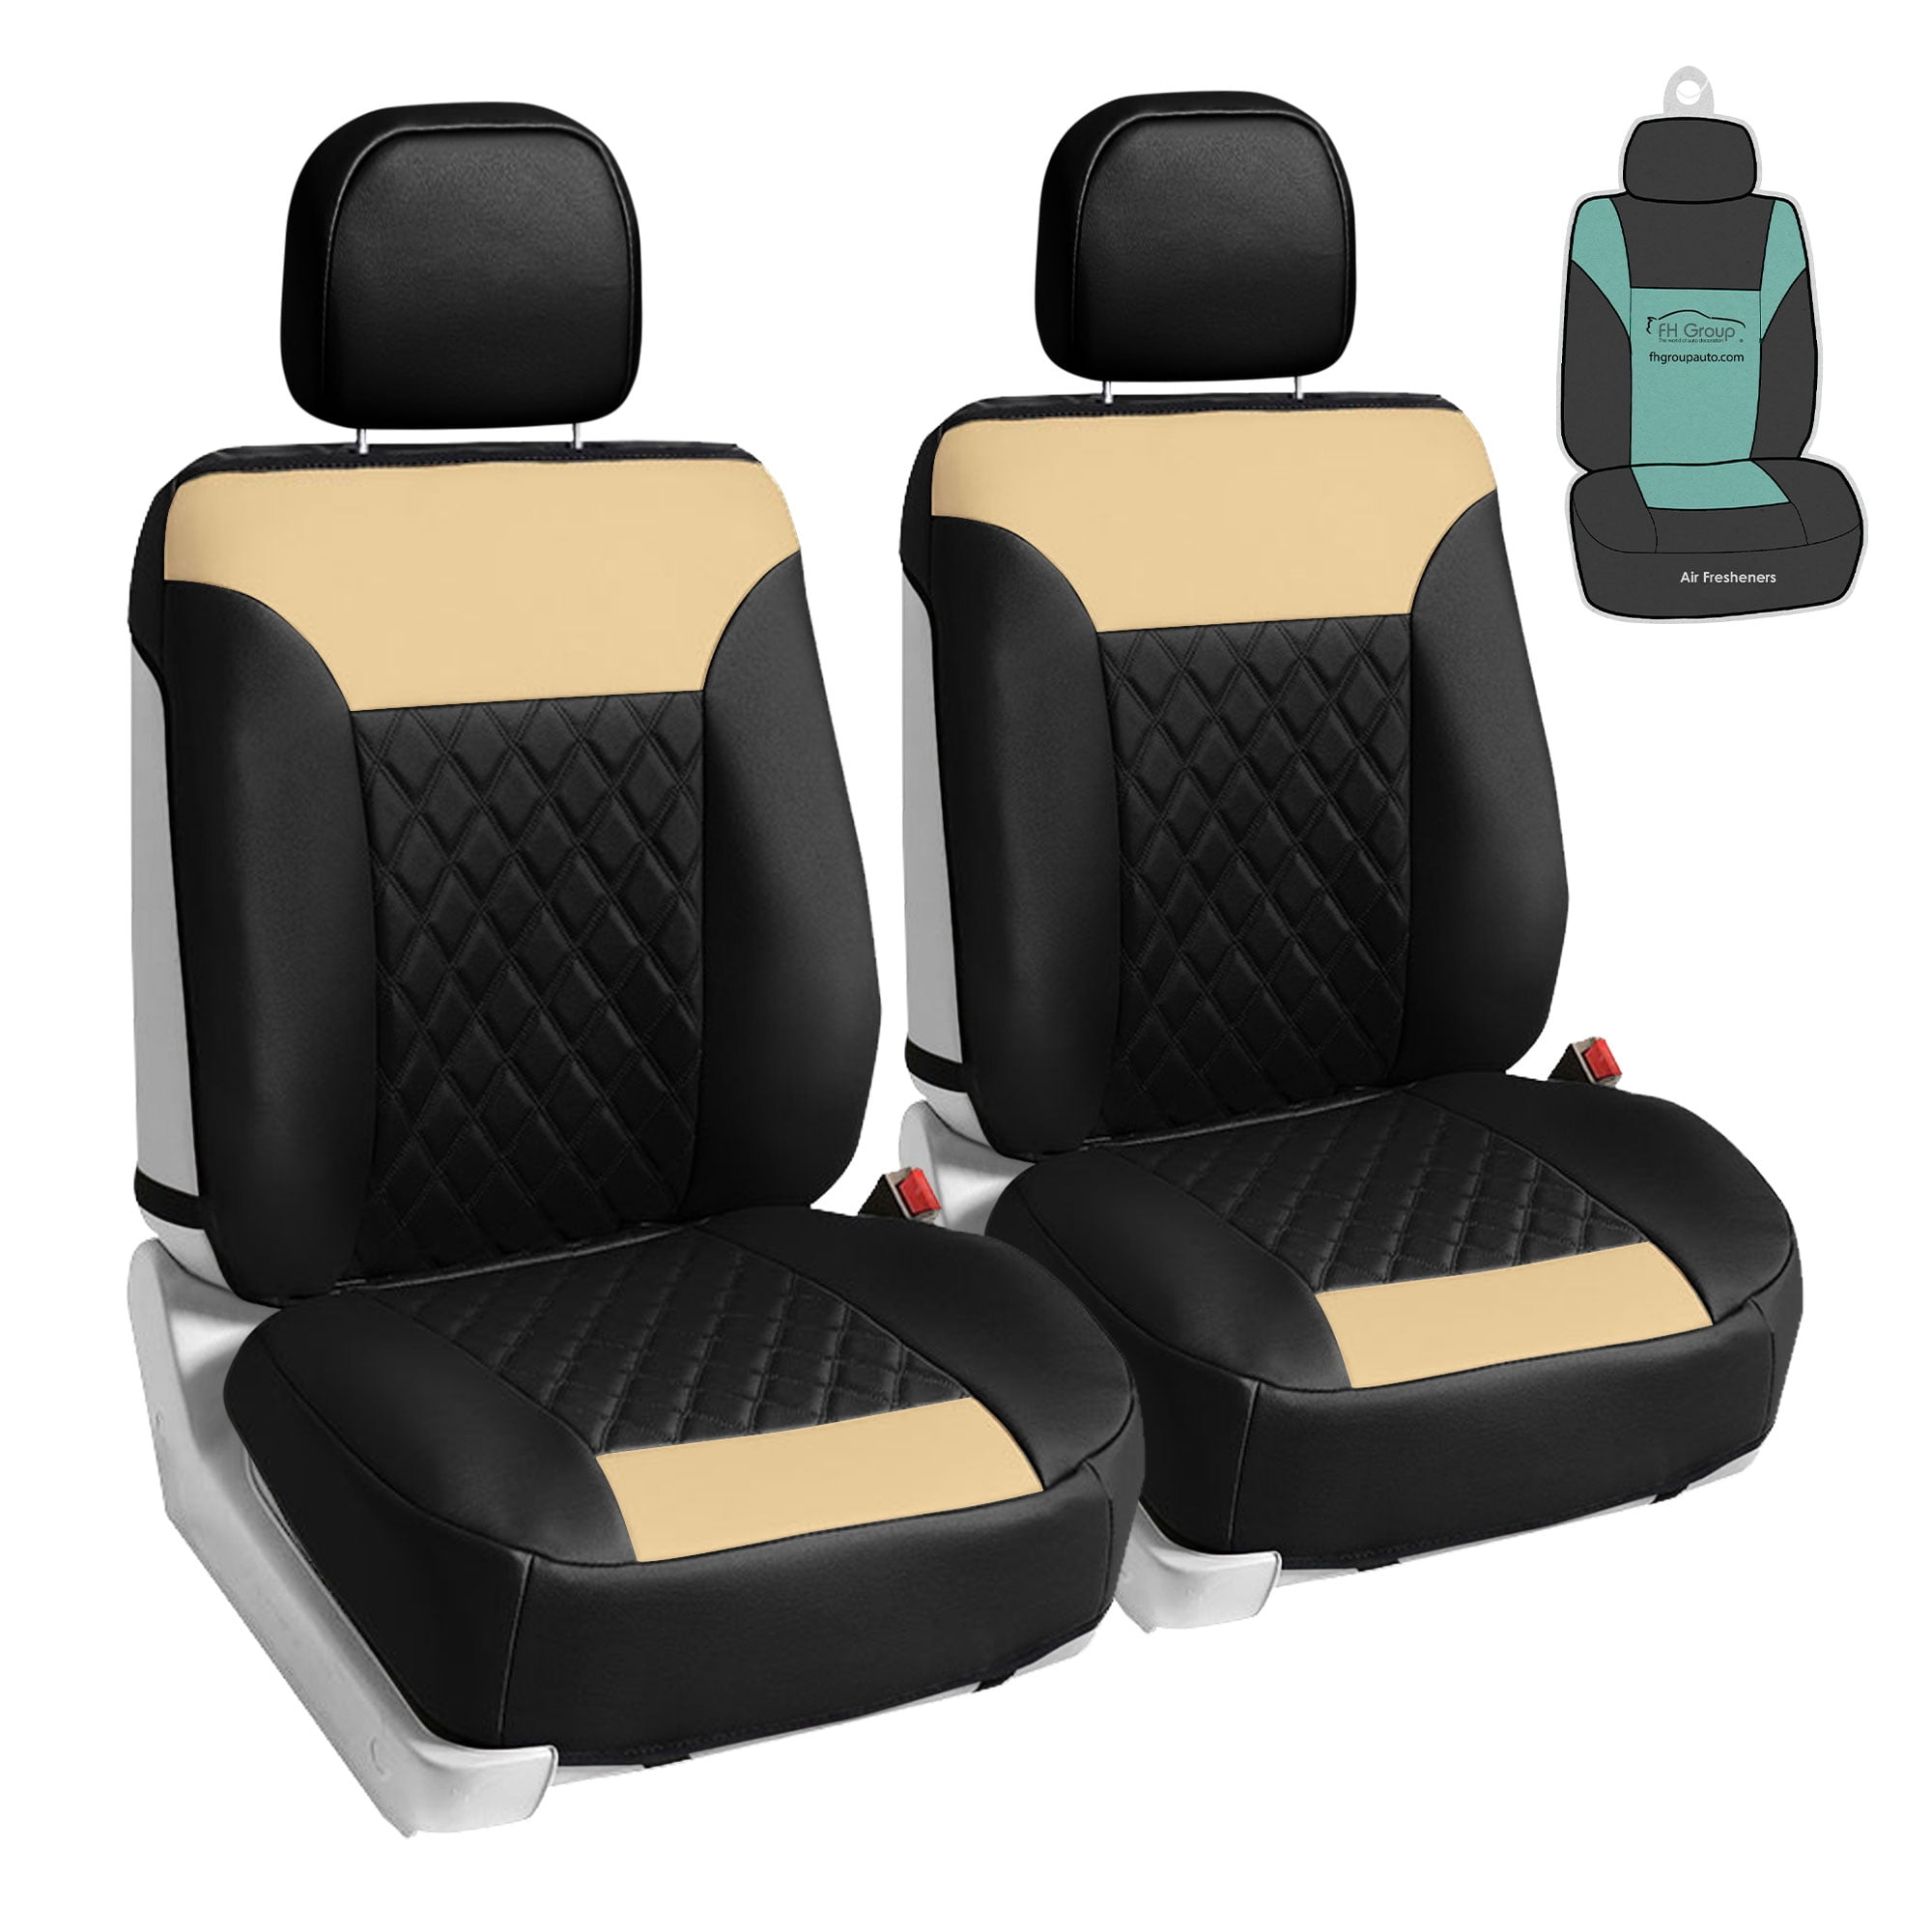 FH Group Universal 23 in. x 1 in. x 47 in. Fit Luxury Front Seat Cushions with Leatherette Trim for Cars, Trucks, SUVs or Vans, Gray